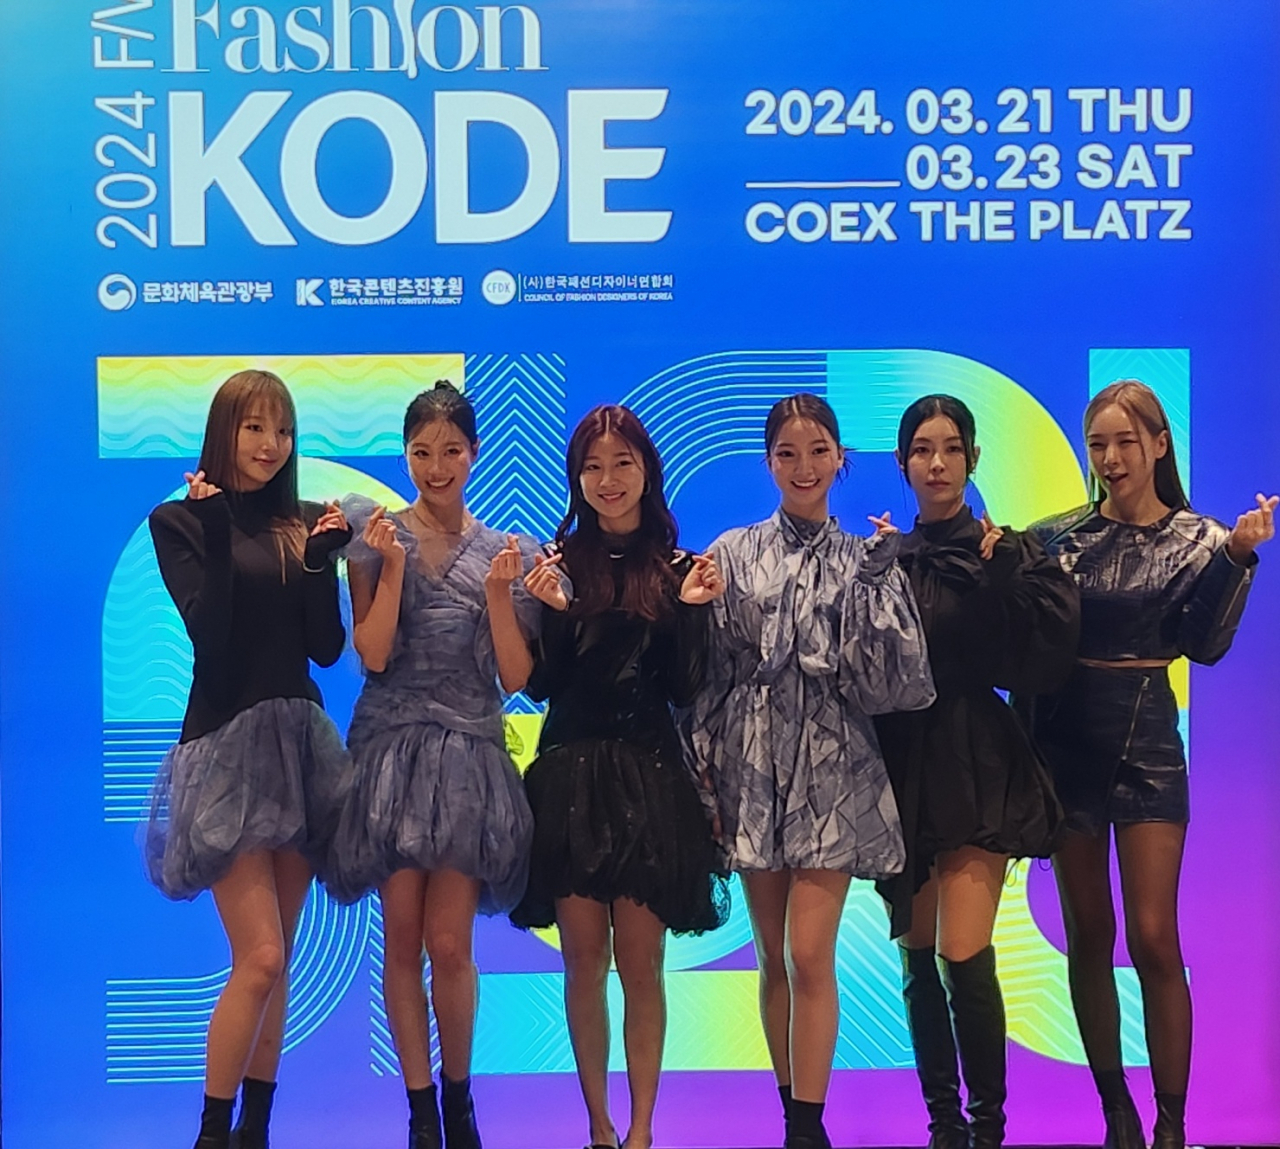 Models pose for a photo during the 2024 Fashion KODE at Coex in Seoul on Friday. (Choi Si-young/The Korea Herald)